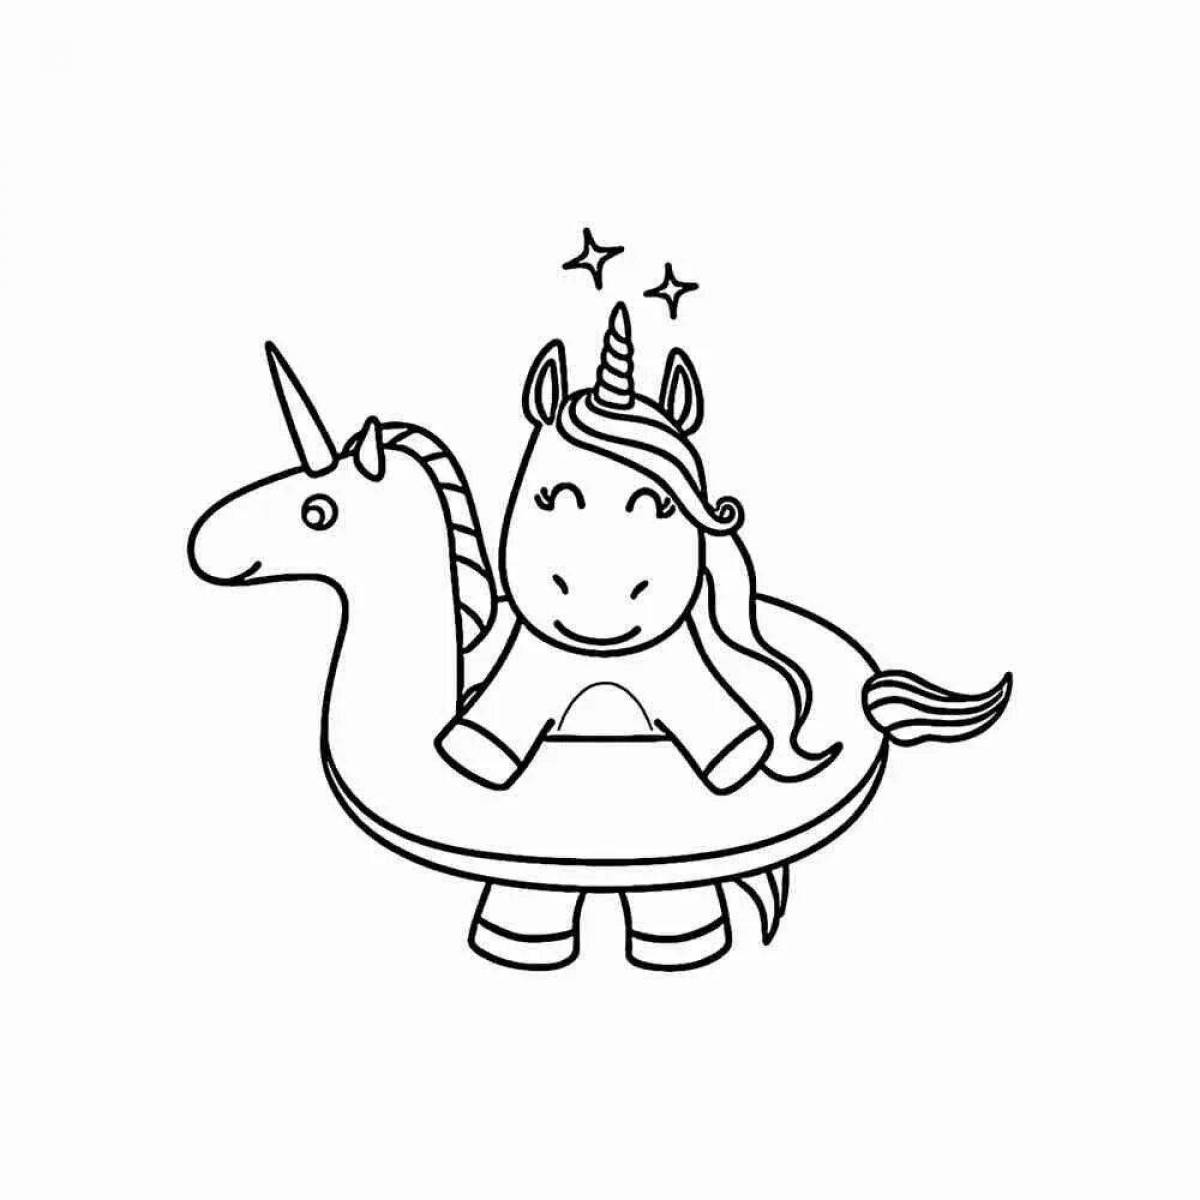 Colorful coloring book for girls cute unicorn